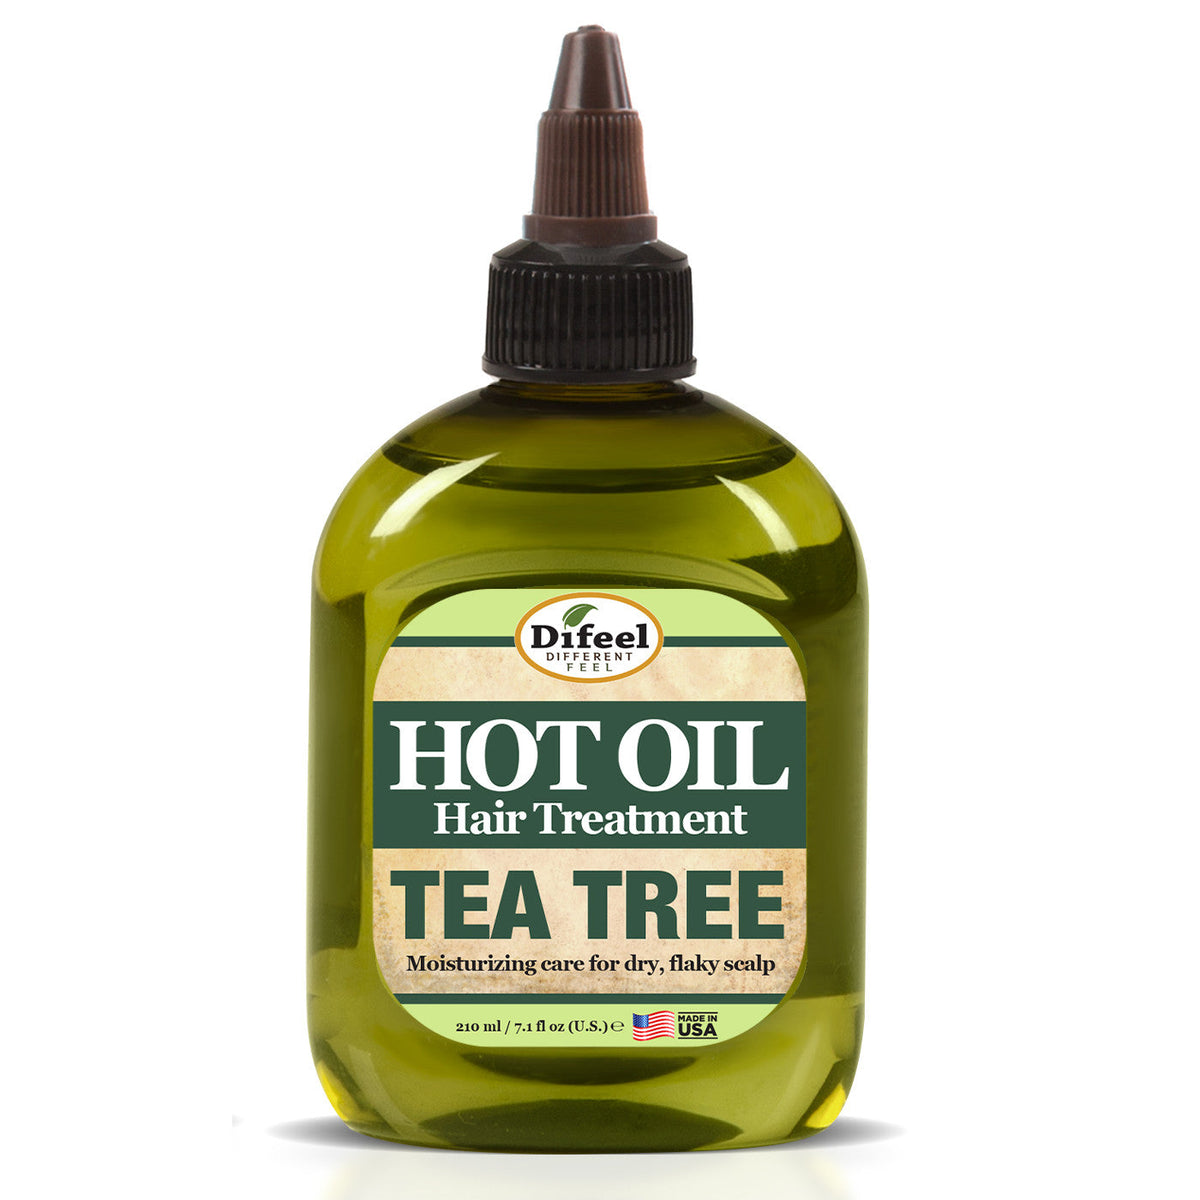 Difeel Tea Tree Hot Oil Treatment 7.1 oz. by difeel - find your natural beauty